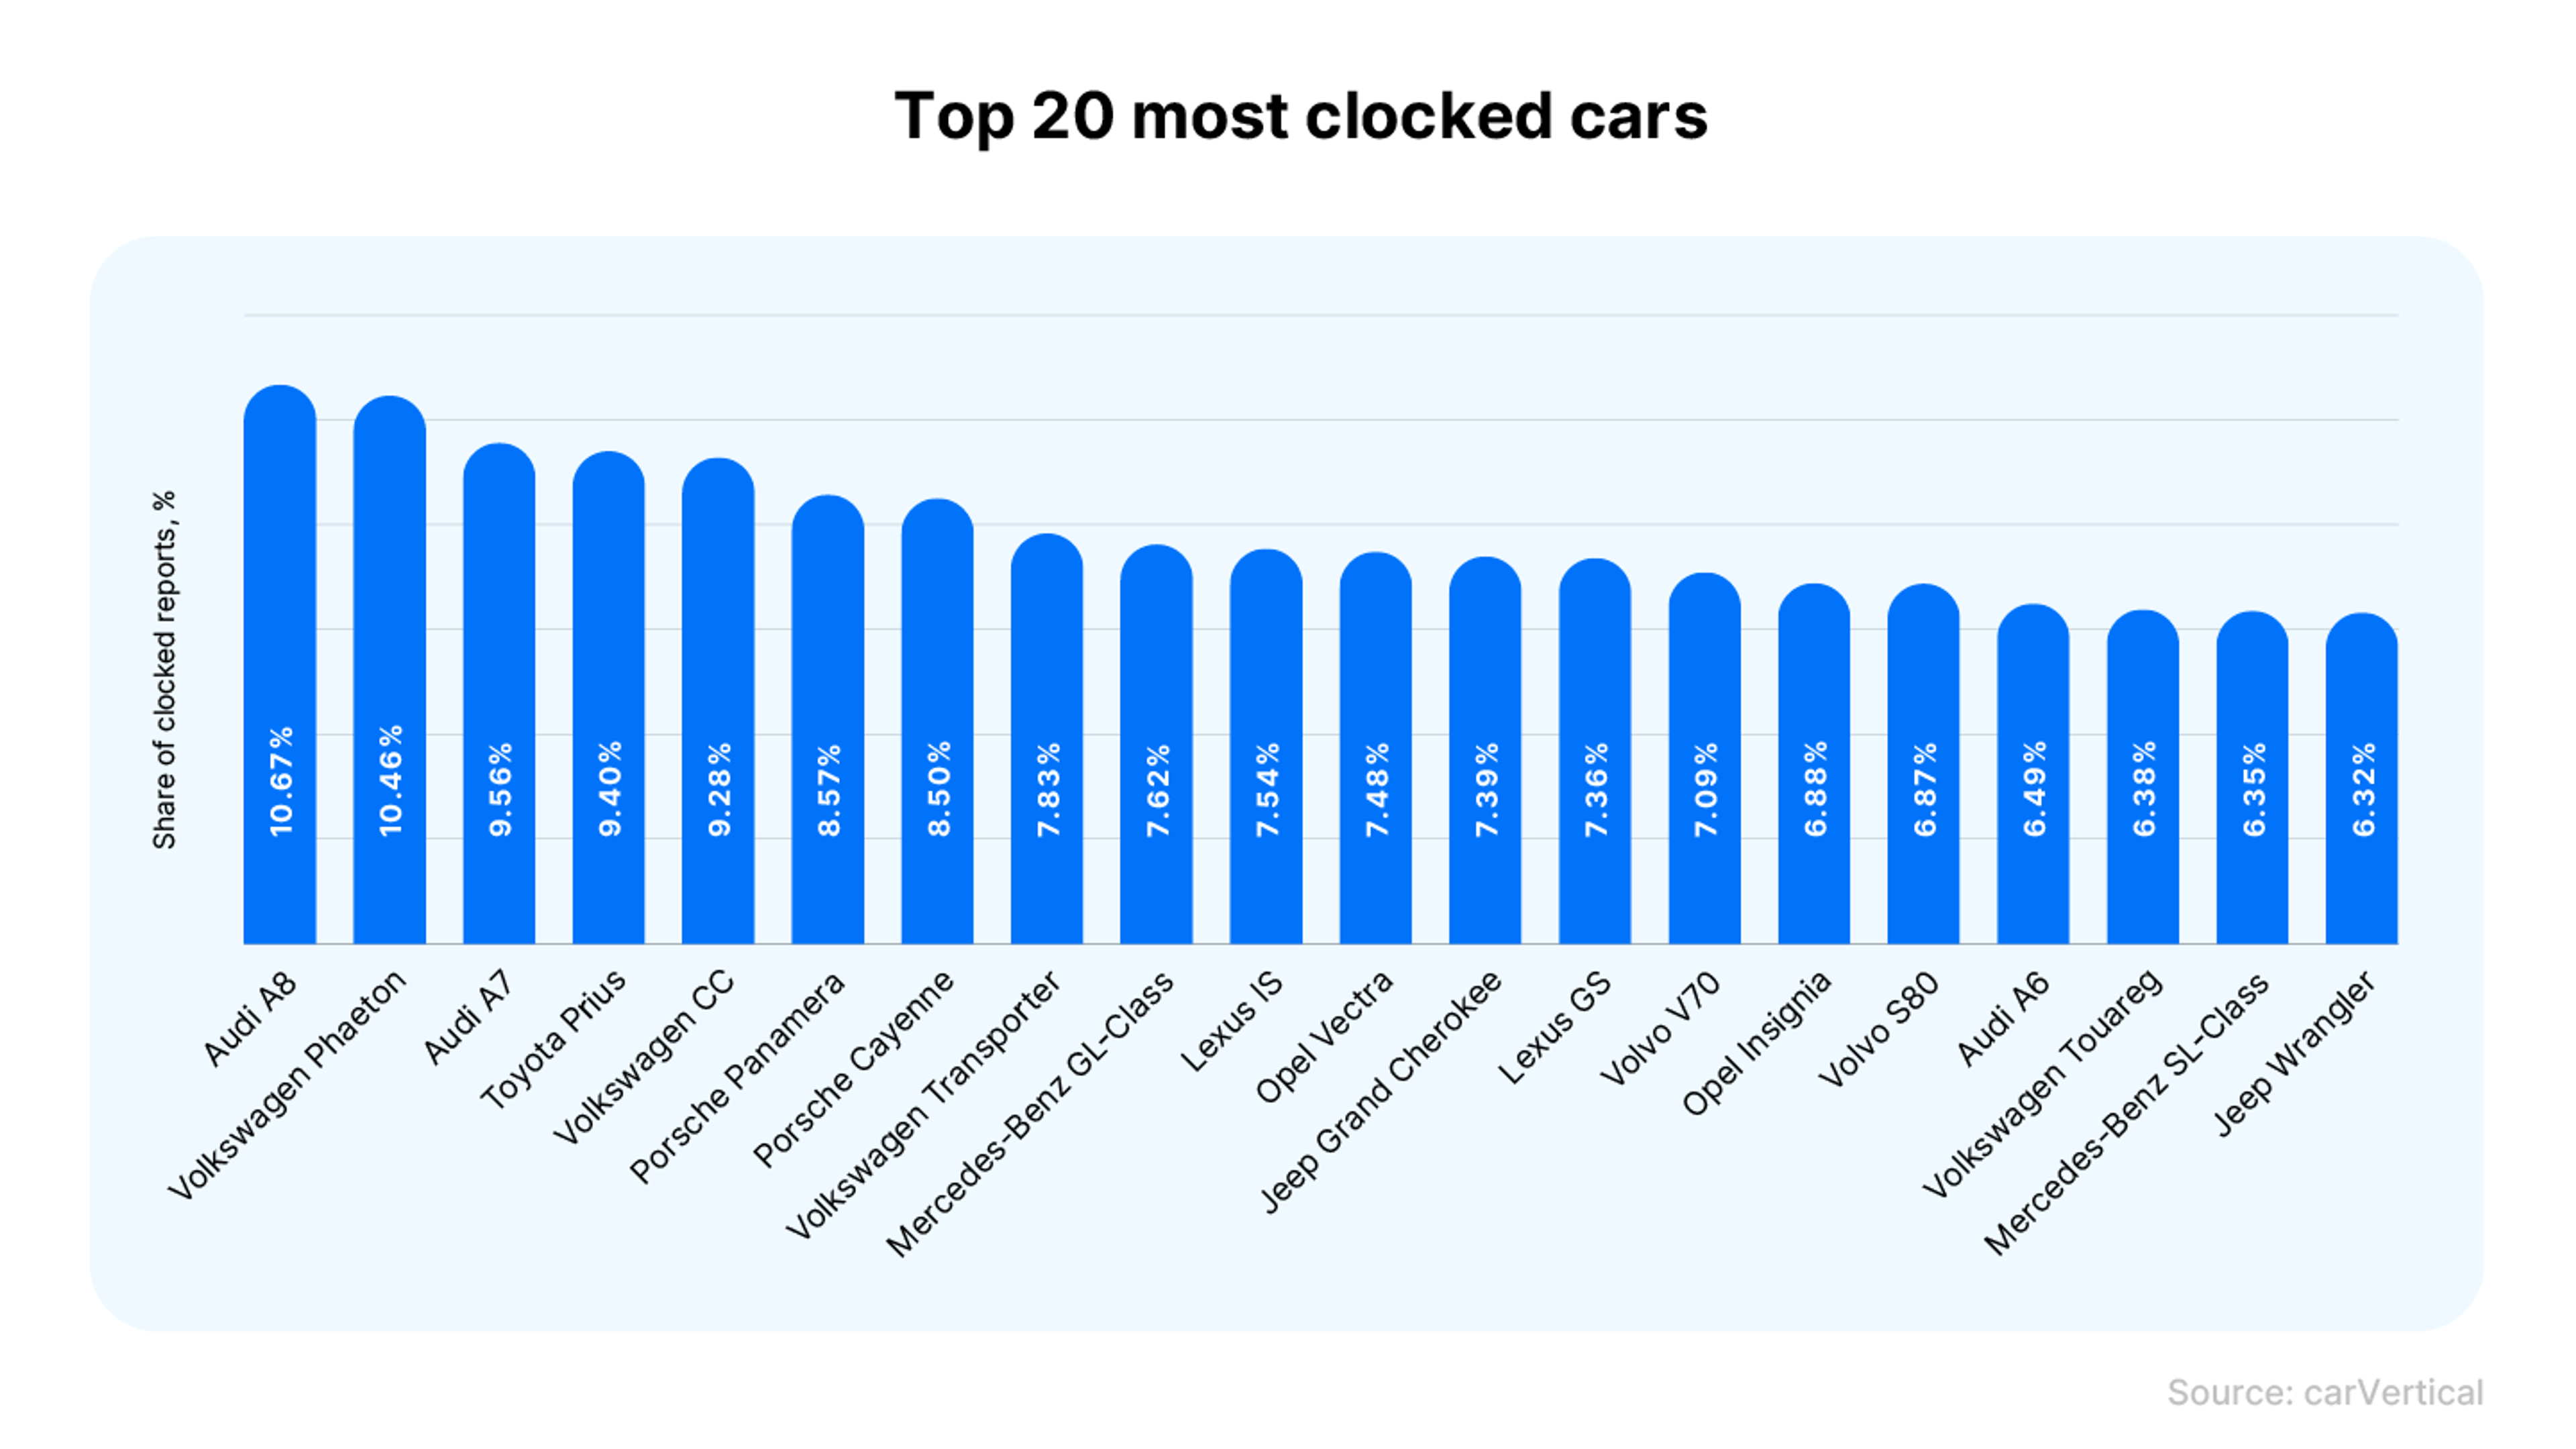 Top 20 most clocked cars